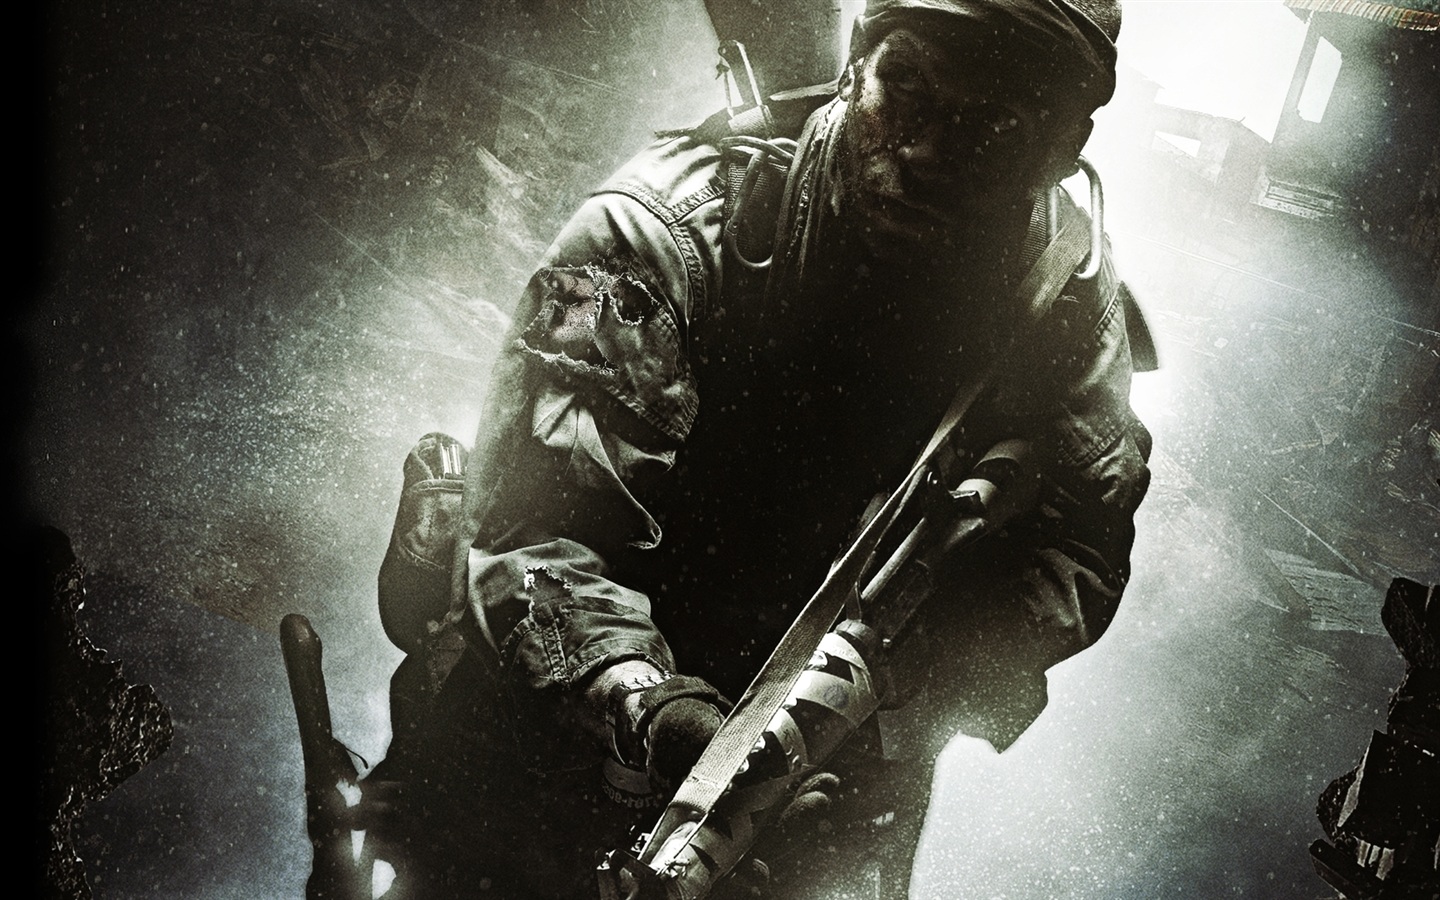 Wallpapers Of Call Of Duty Black Ops 2